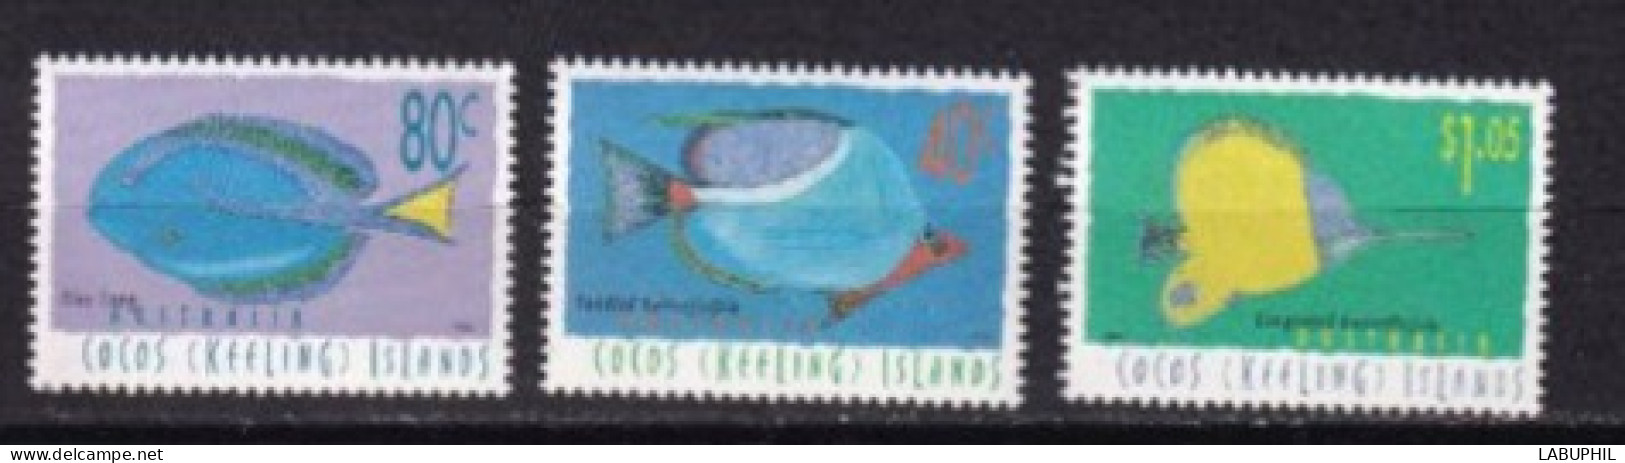 COCOS MNH **  1995 Faune Poissons - Cocos (Keeling) Islands